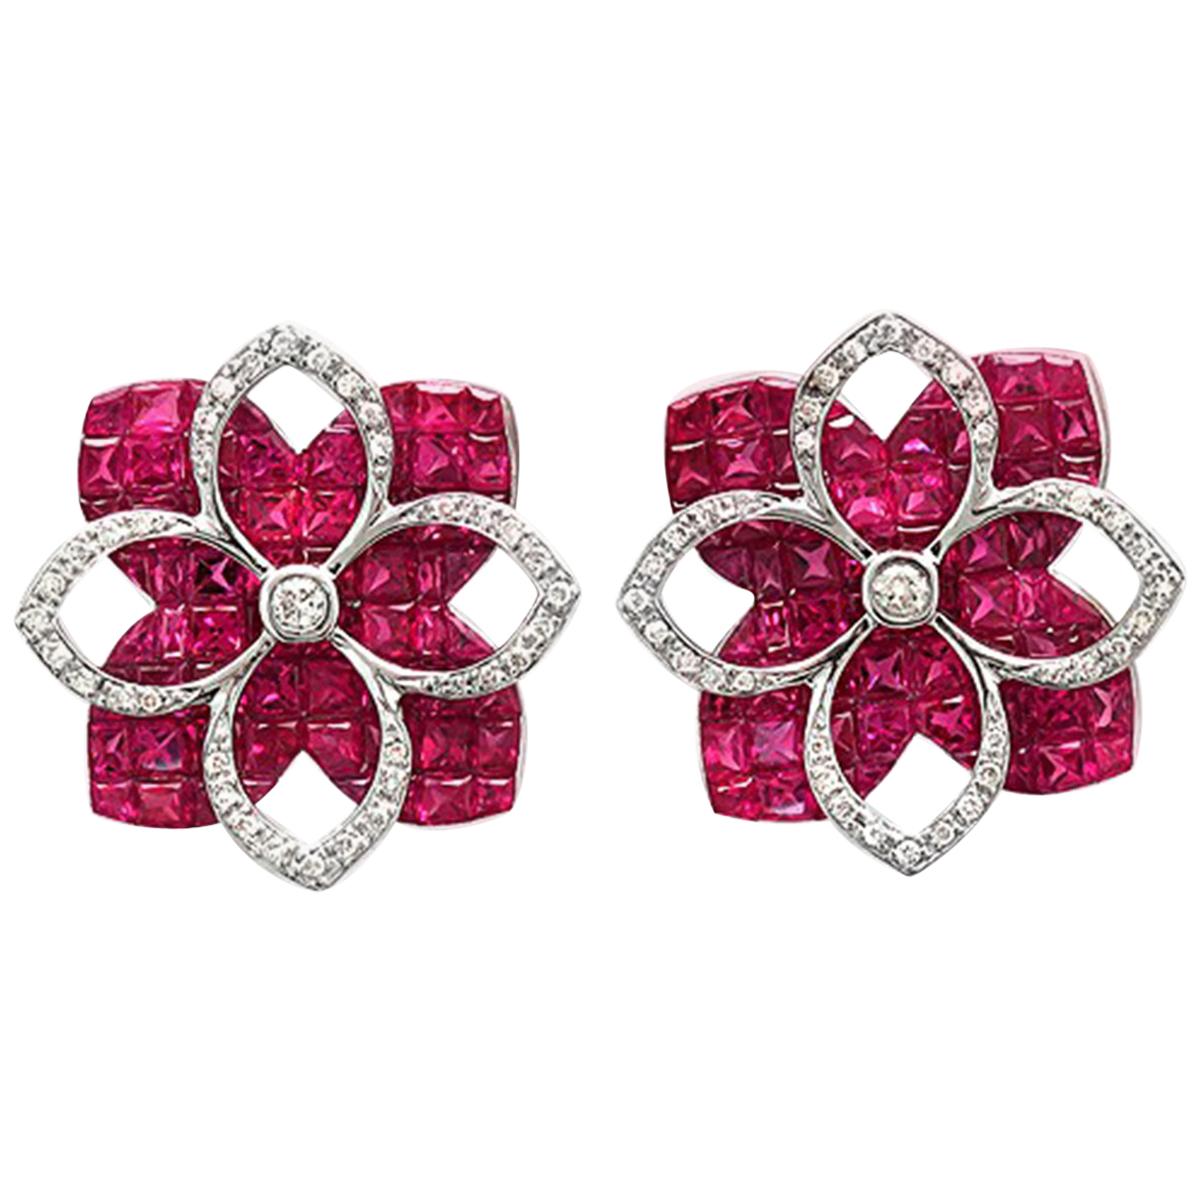 18 Karat White Gold 0.32 Carat Diamonds and Invisible 9.86 Carat Ruby Earrings For Sale